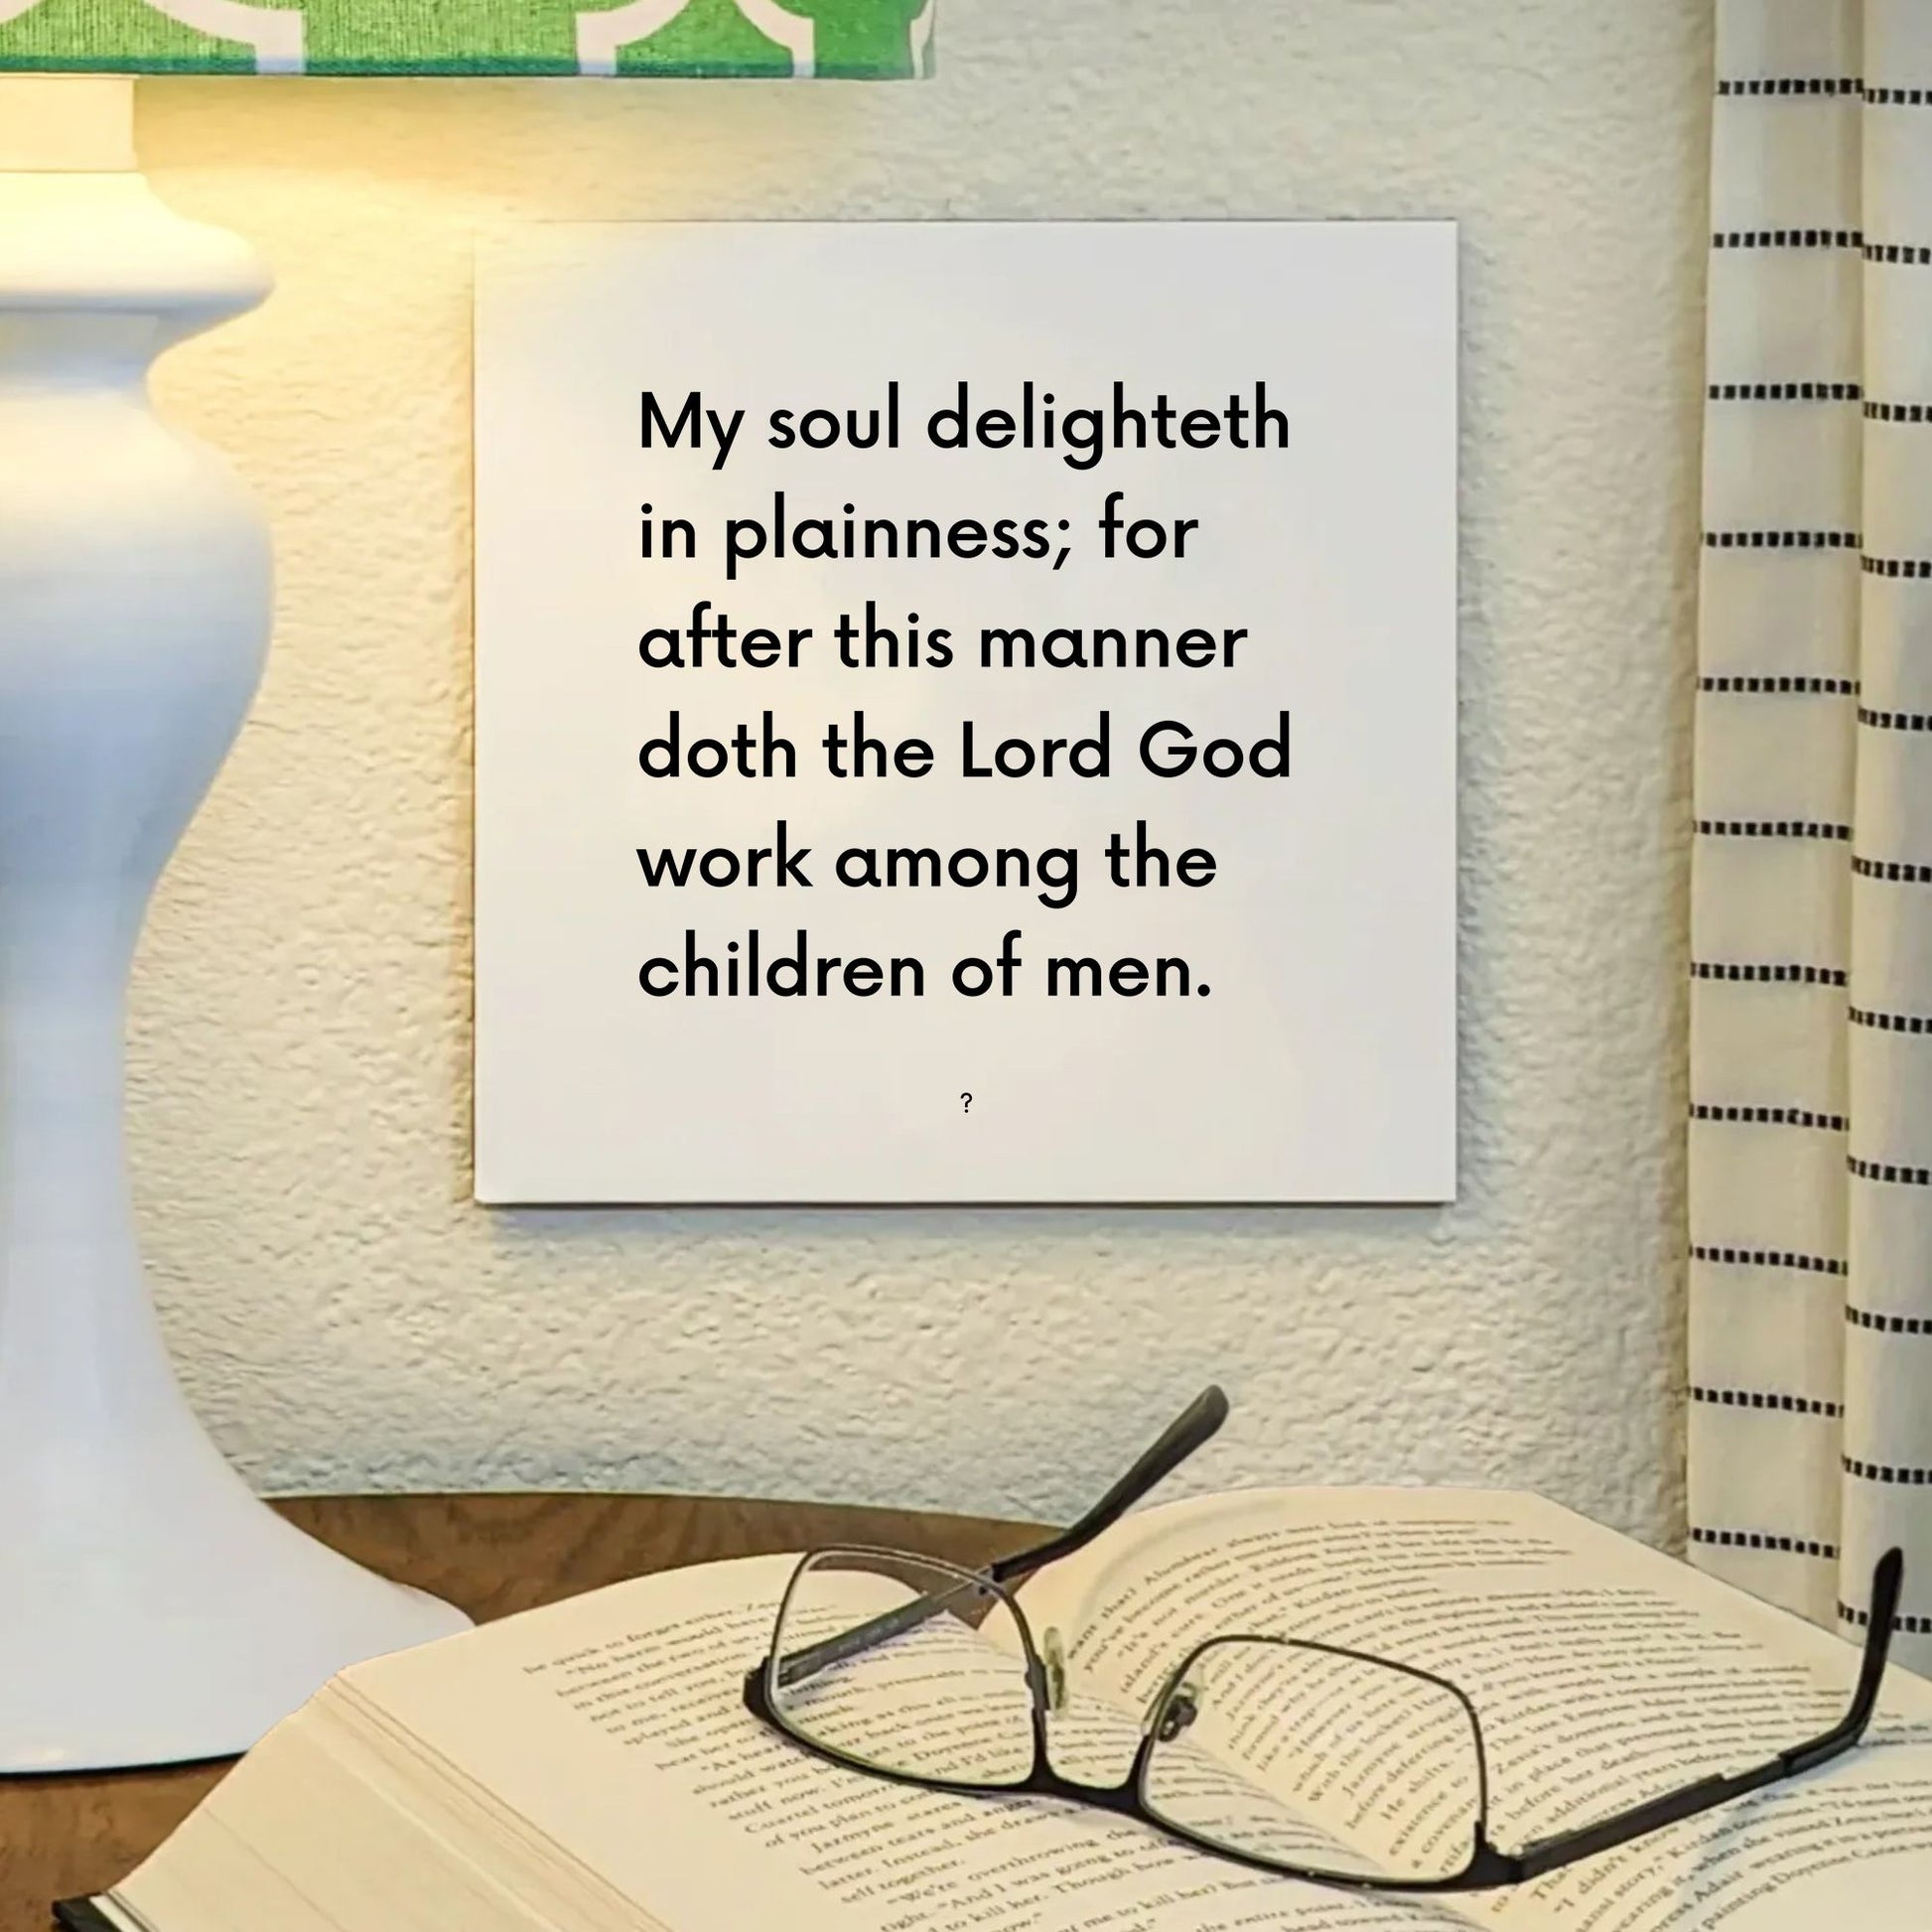 Lamp mouting of the scripture tile for 2 Nephi 31:3 - "My soul delighteth in plainness"